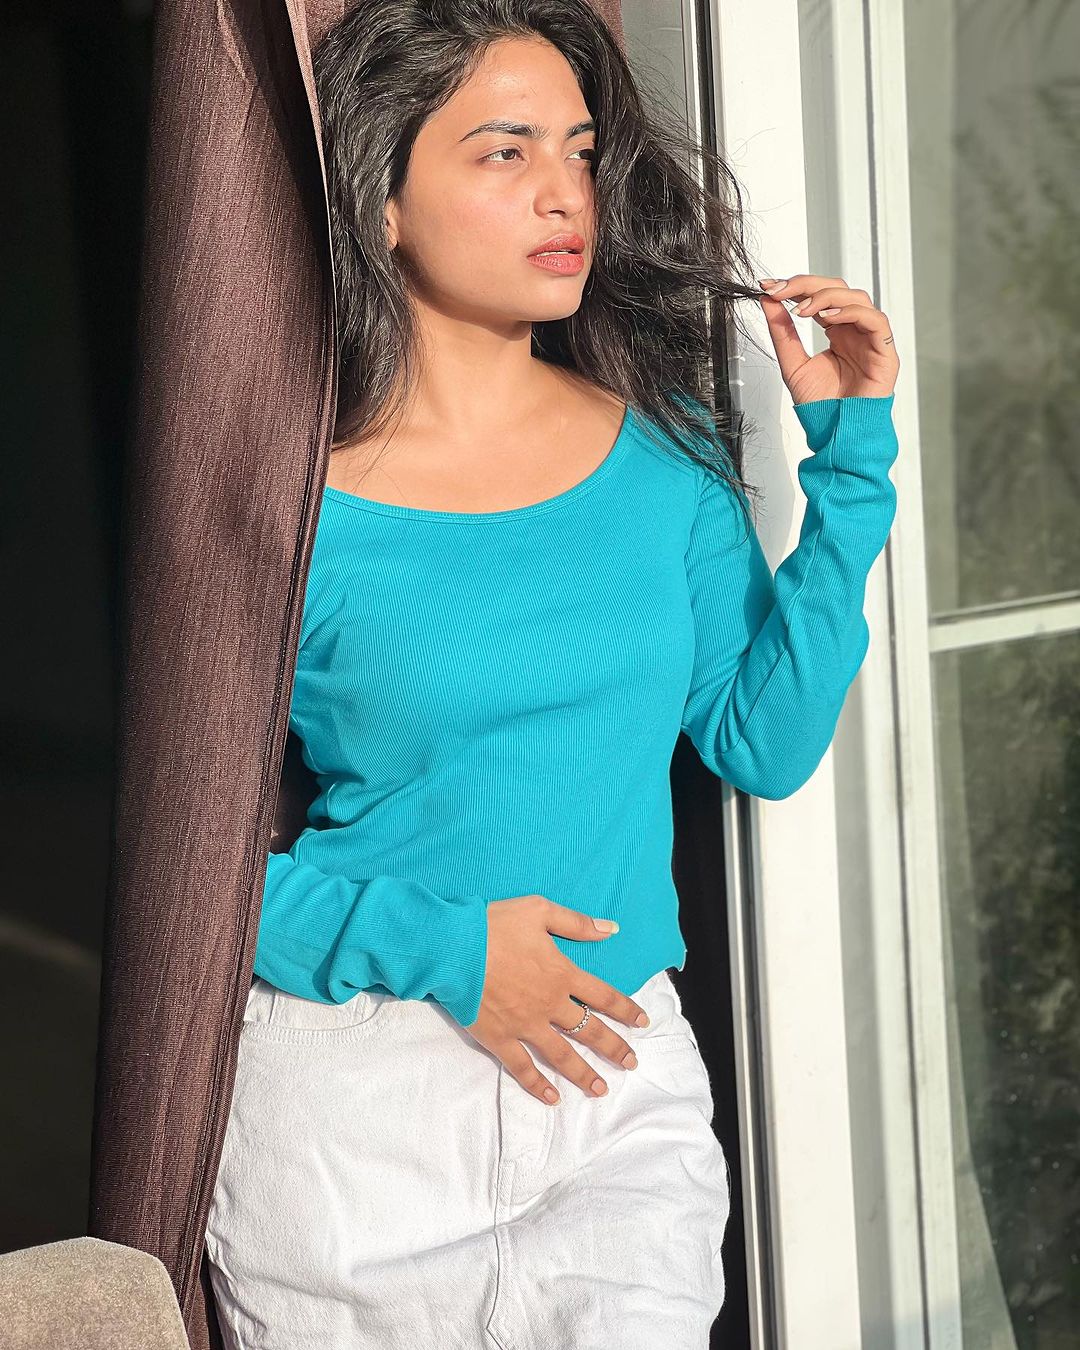 Actress alekhya harika cant stop gushing on this latest pictures-Actressalekhya, Alekhya Harika Photos,Spicy Hot Pics,Images,High Resolution WallPapers Download